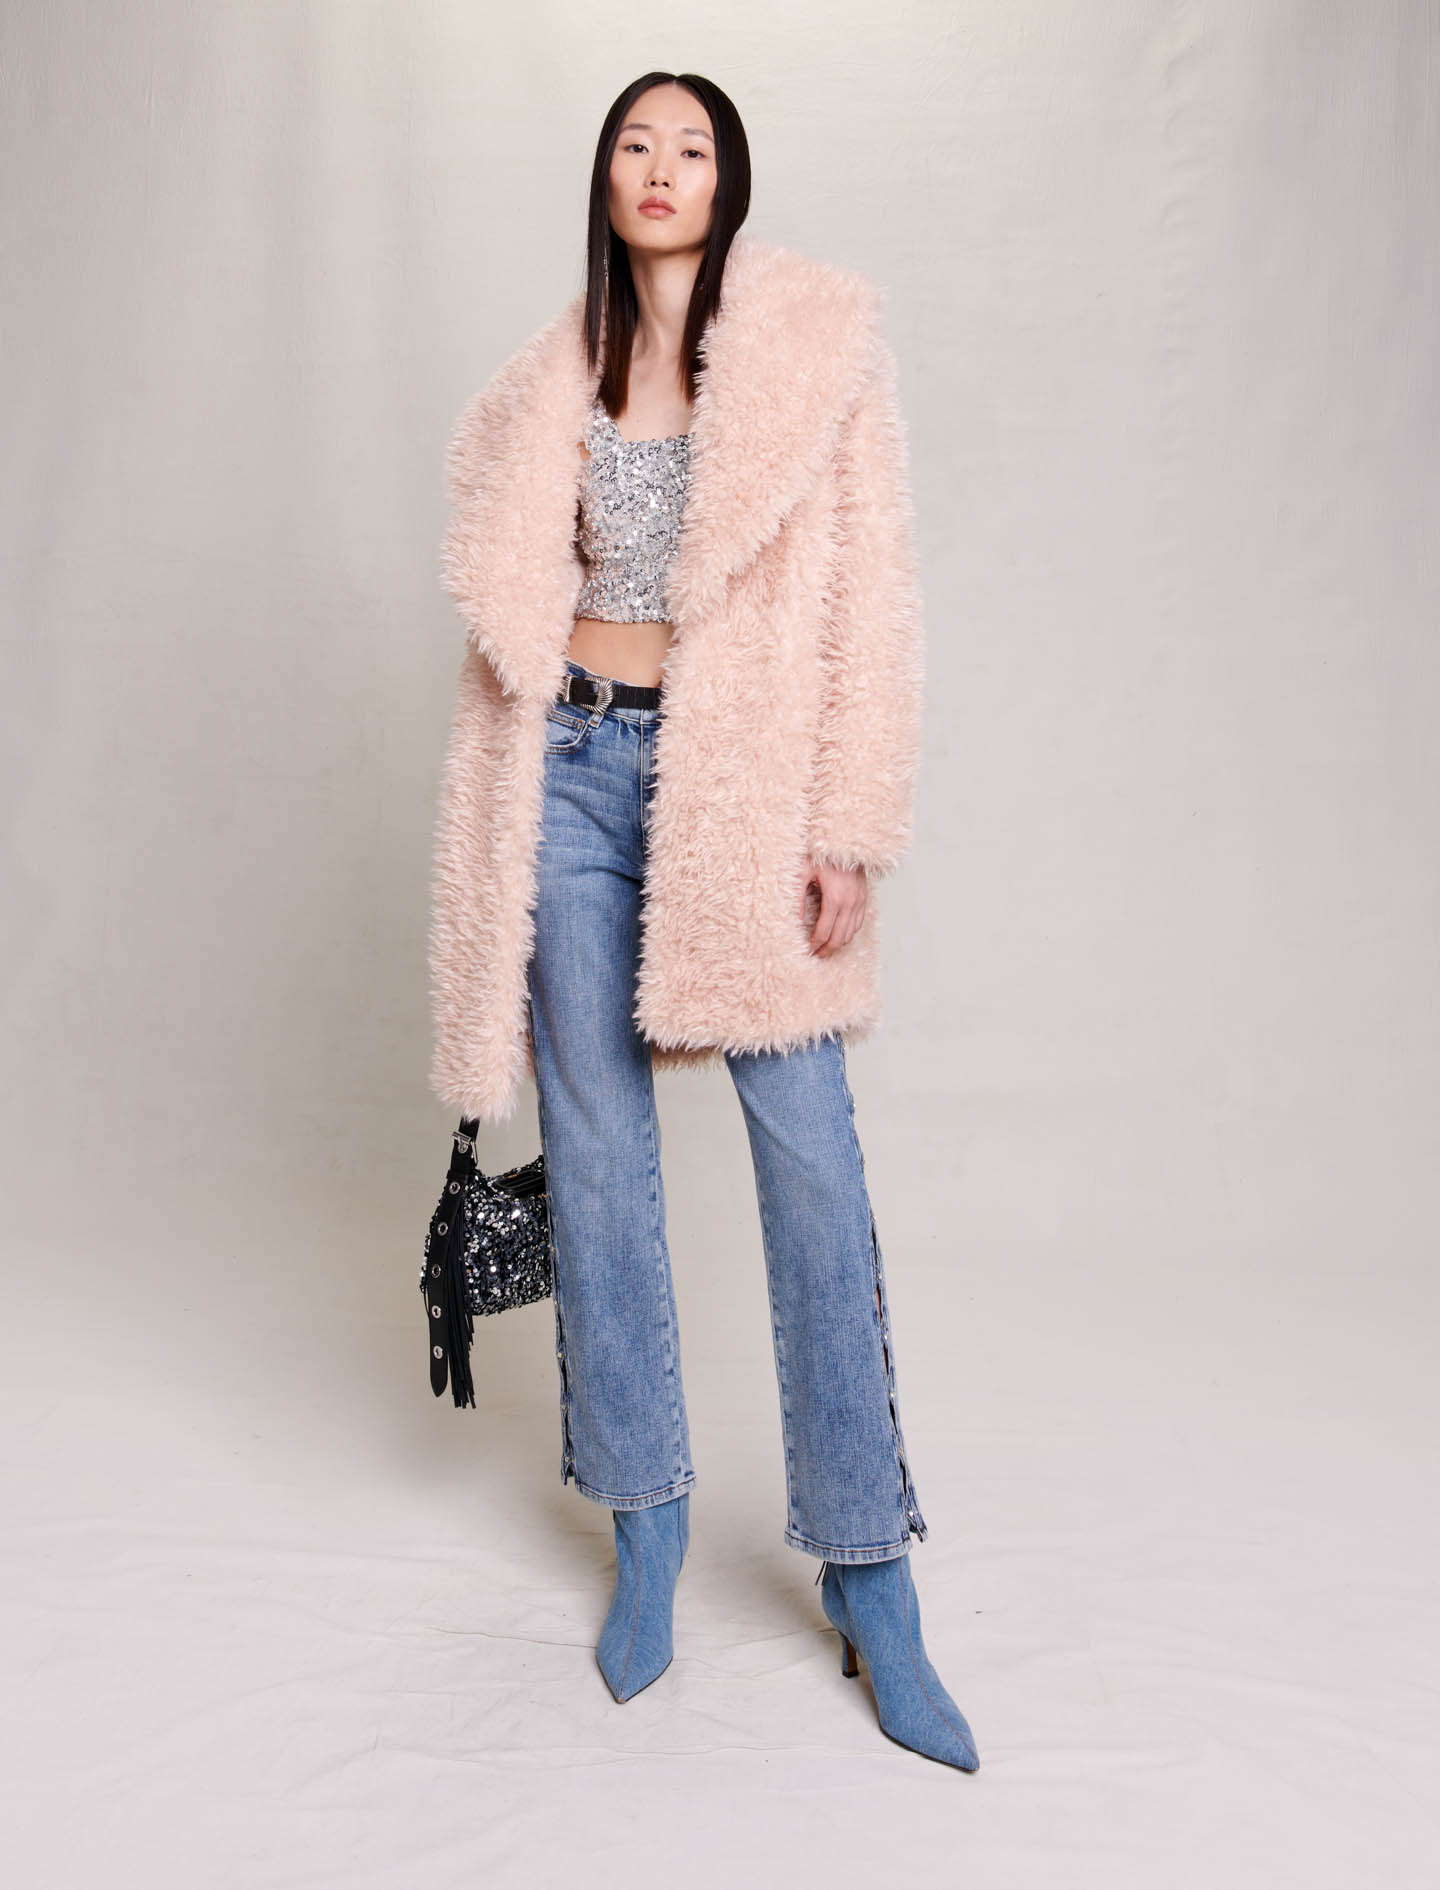 Maje Woman's polyester Faux fur: Faux fur coat for Fall/Winter, in color Light pink /